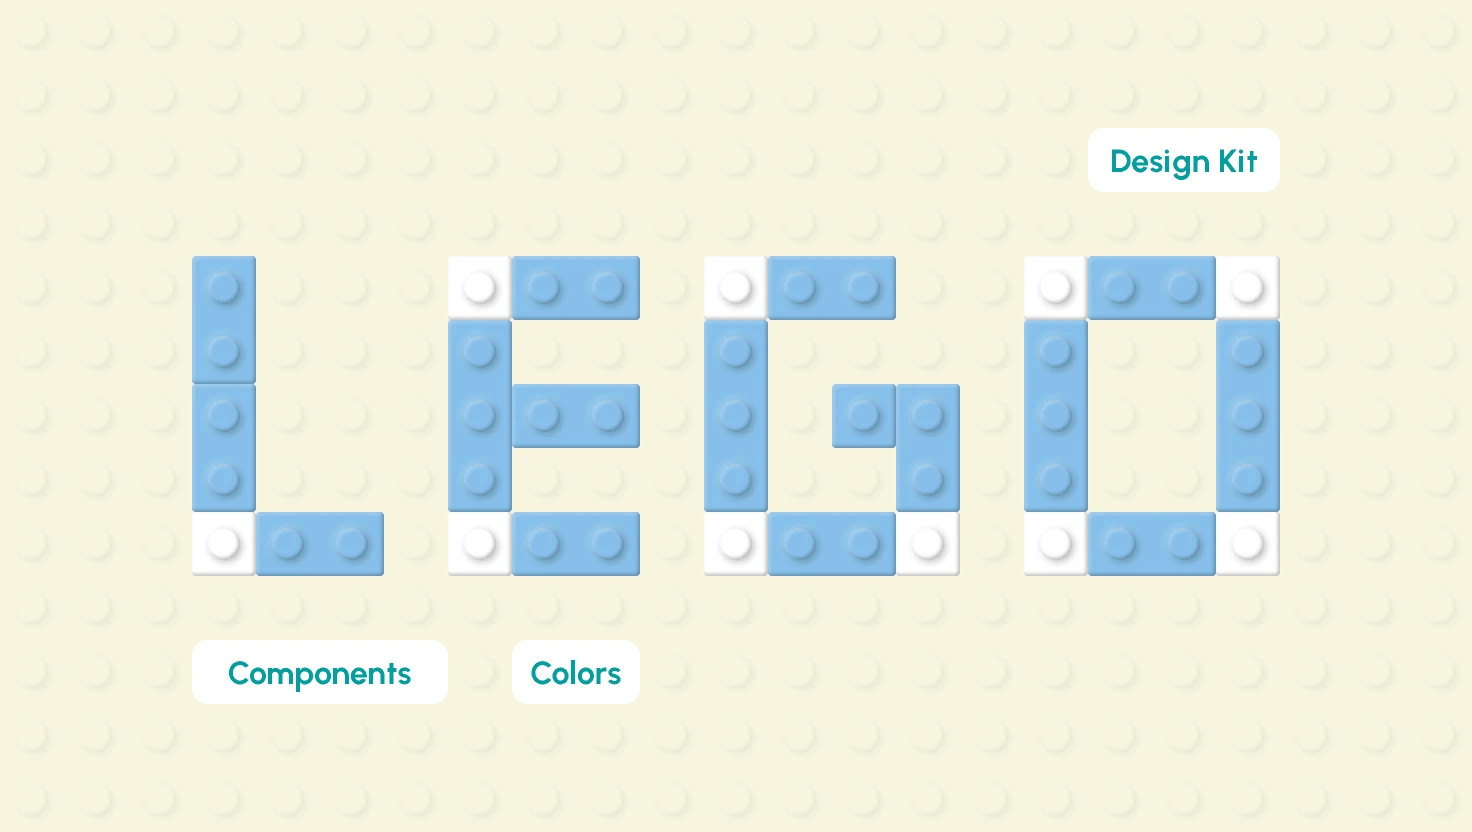 Lego Design Kit for Figma and Adobe XD